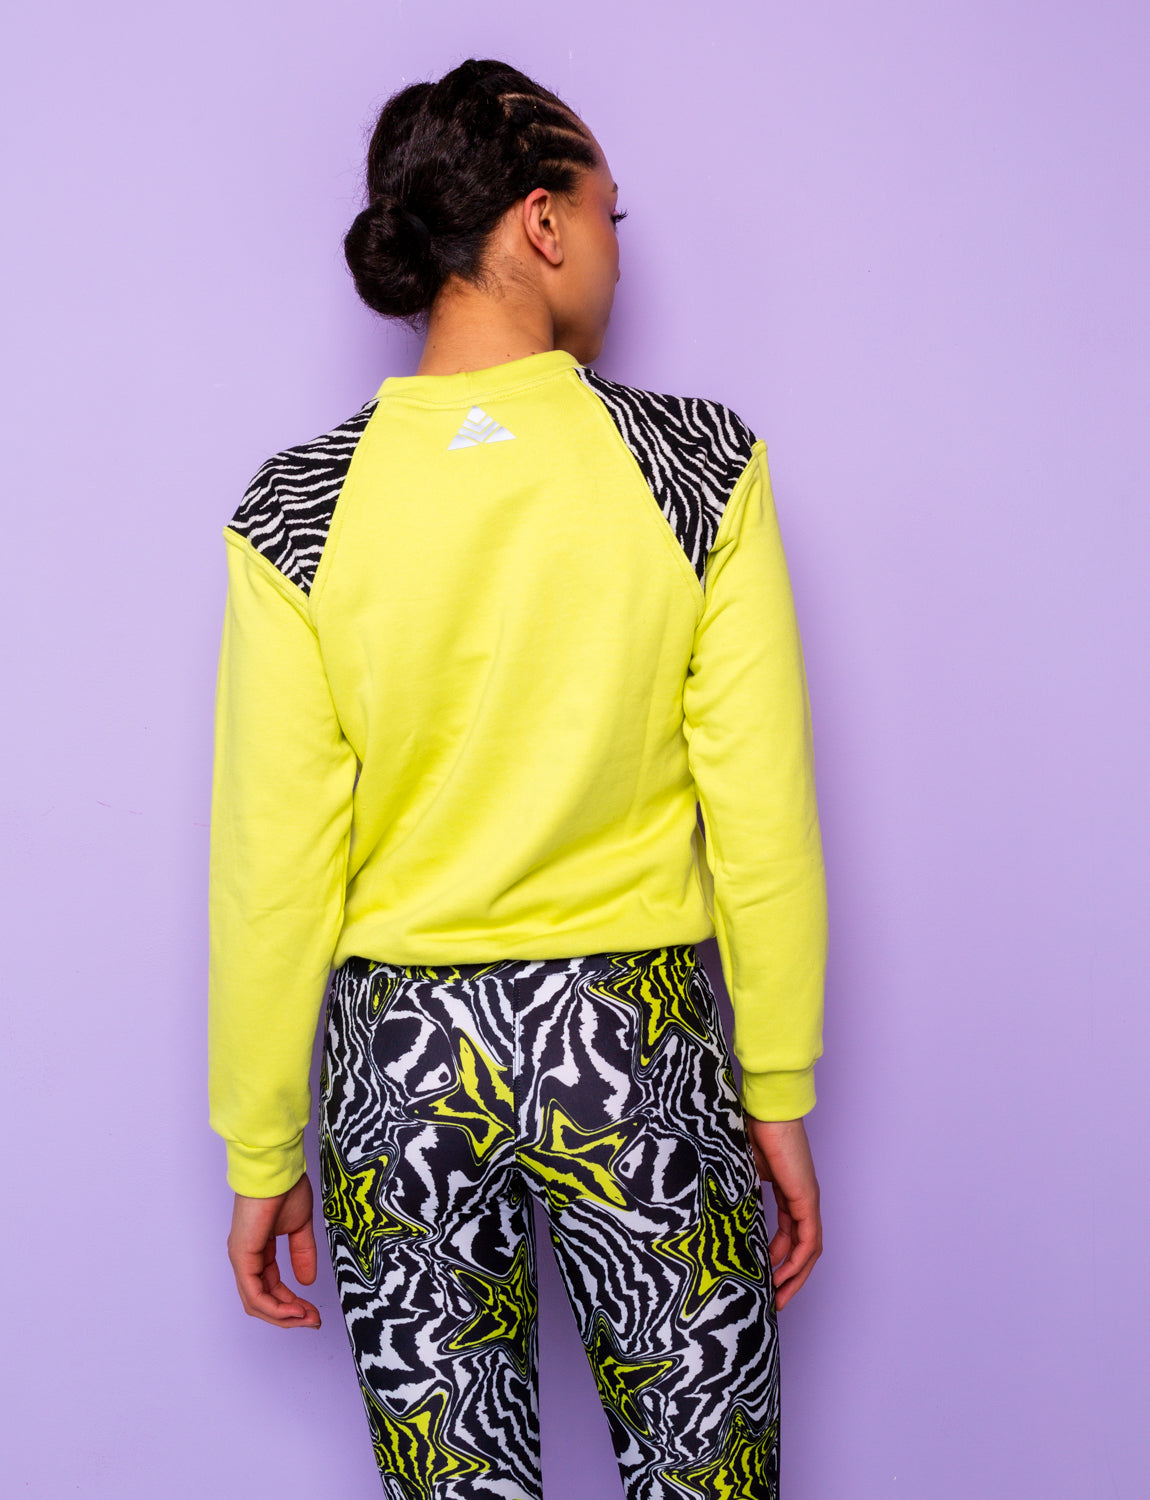 back of woman wearing a lime green sweatshirt with black and white zebra print shoulders